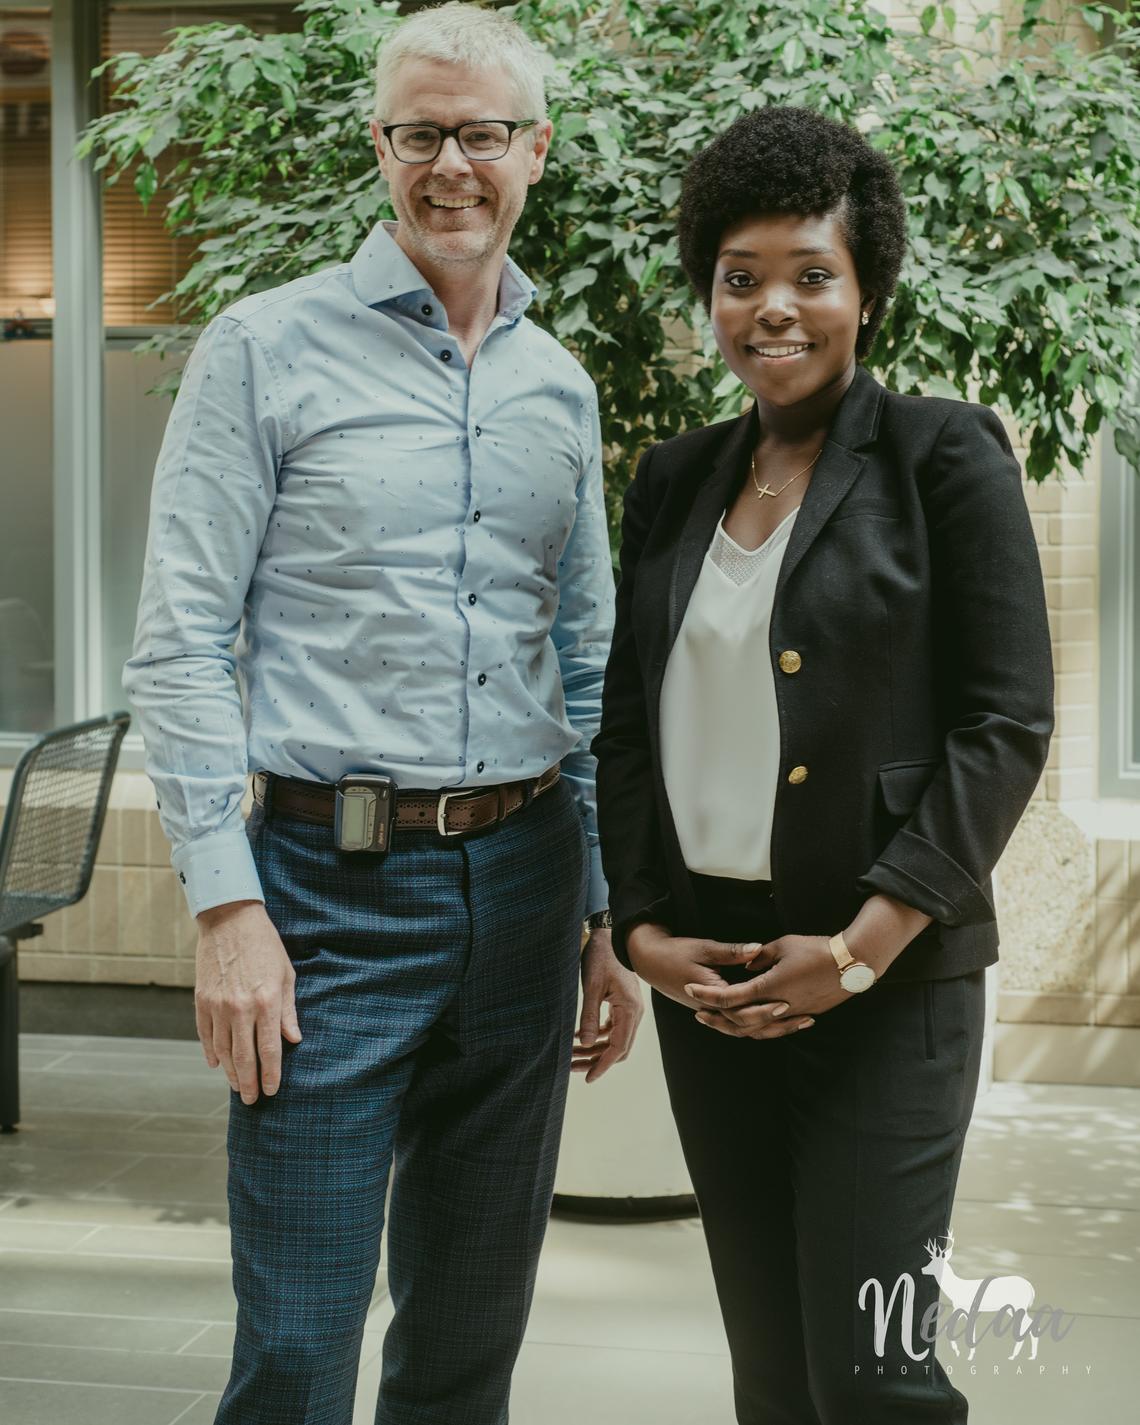 The University of Calgary's Andrew Daly performed the stem cell transplant that cured Revée Agyepong's sickle cell anemia.